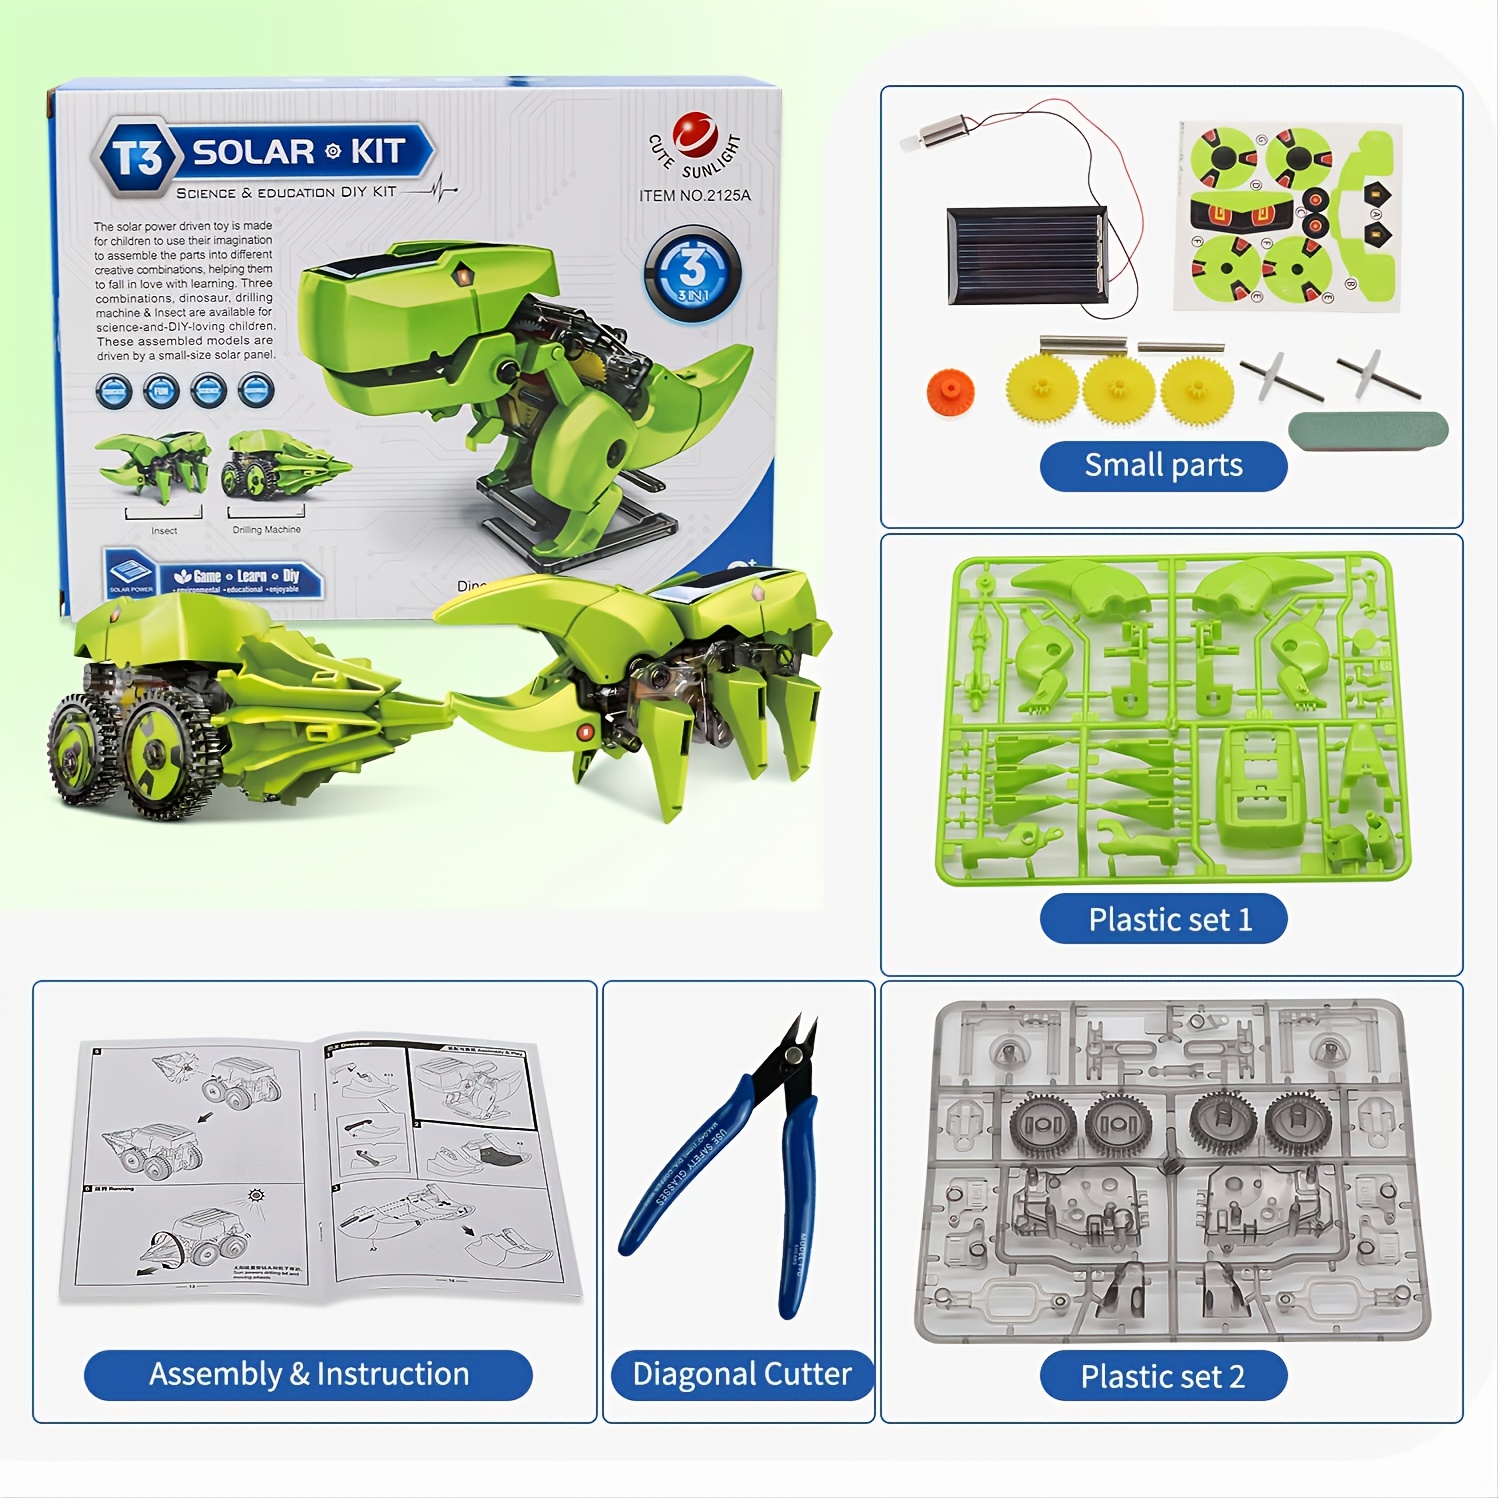 Petsta Robot Dinosaur Toys, 3-in-1 Solar Robot Kit, Stem Projects for Kids Ages 8-12, Building Games Robot Toys for 8 9 10 11 12 Year Old Boys Girls